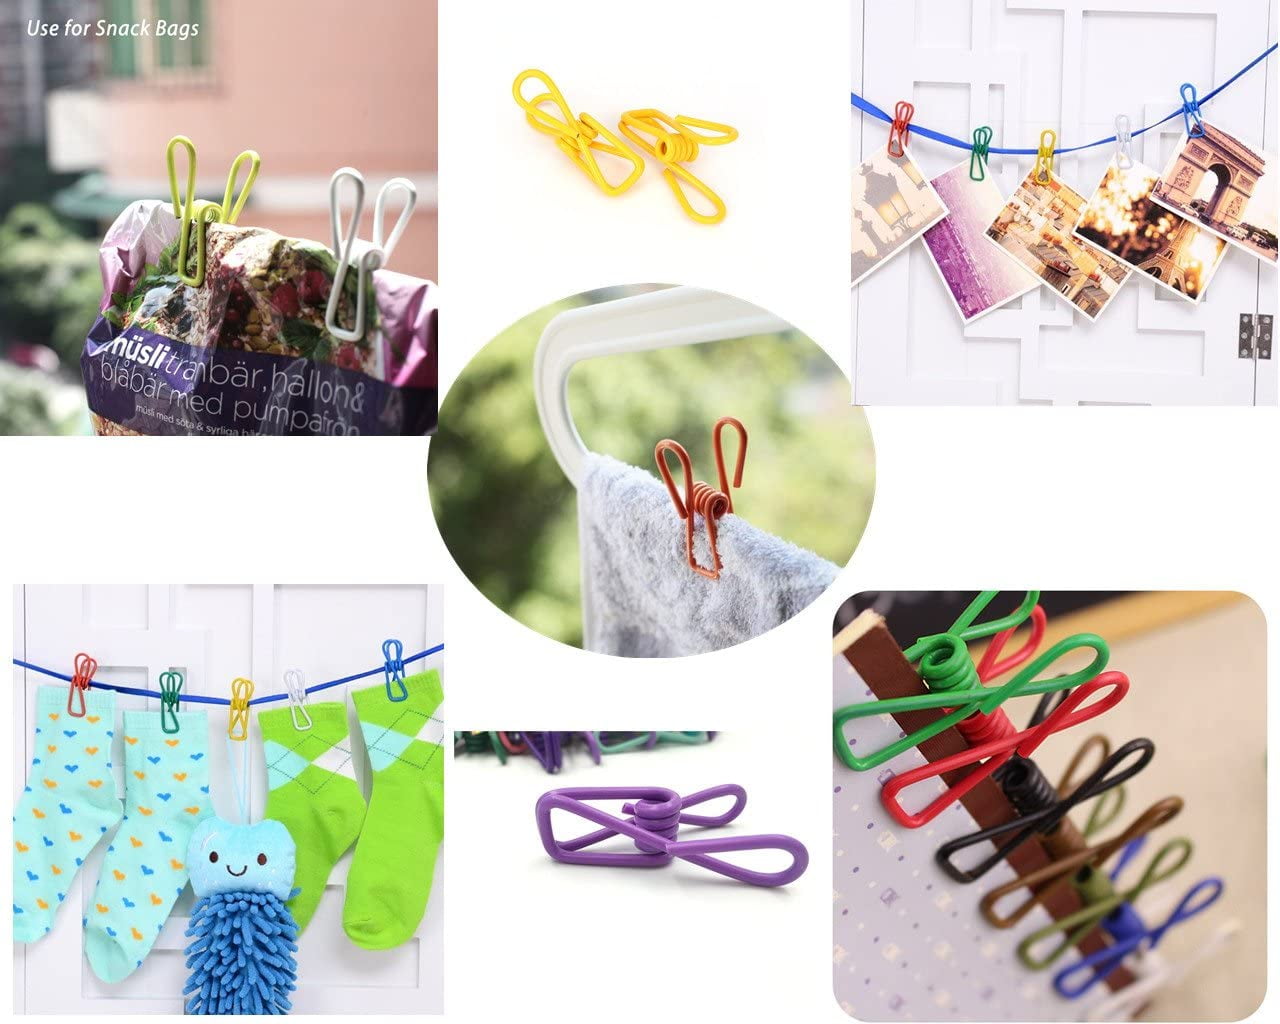 Office Bags Sealing Clip Utility Clips:30pcs Mixed Colors PVC Coated Spring Clamps 2 for Chip Clips,Clothesline Clip Laundry Hanging,Gathering Clip Used in a Variety of Applications. Mixed Colors 